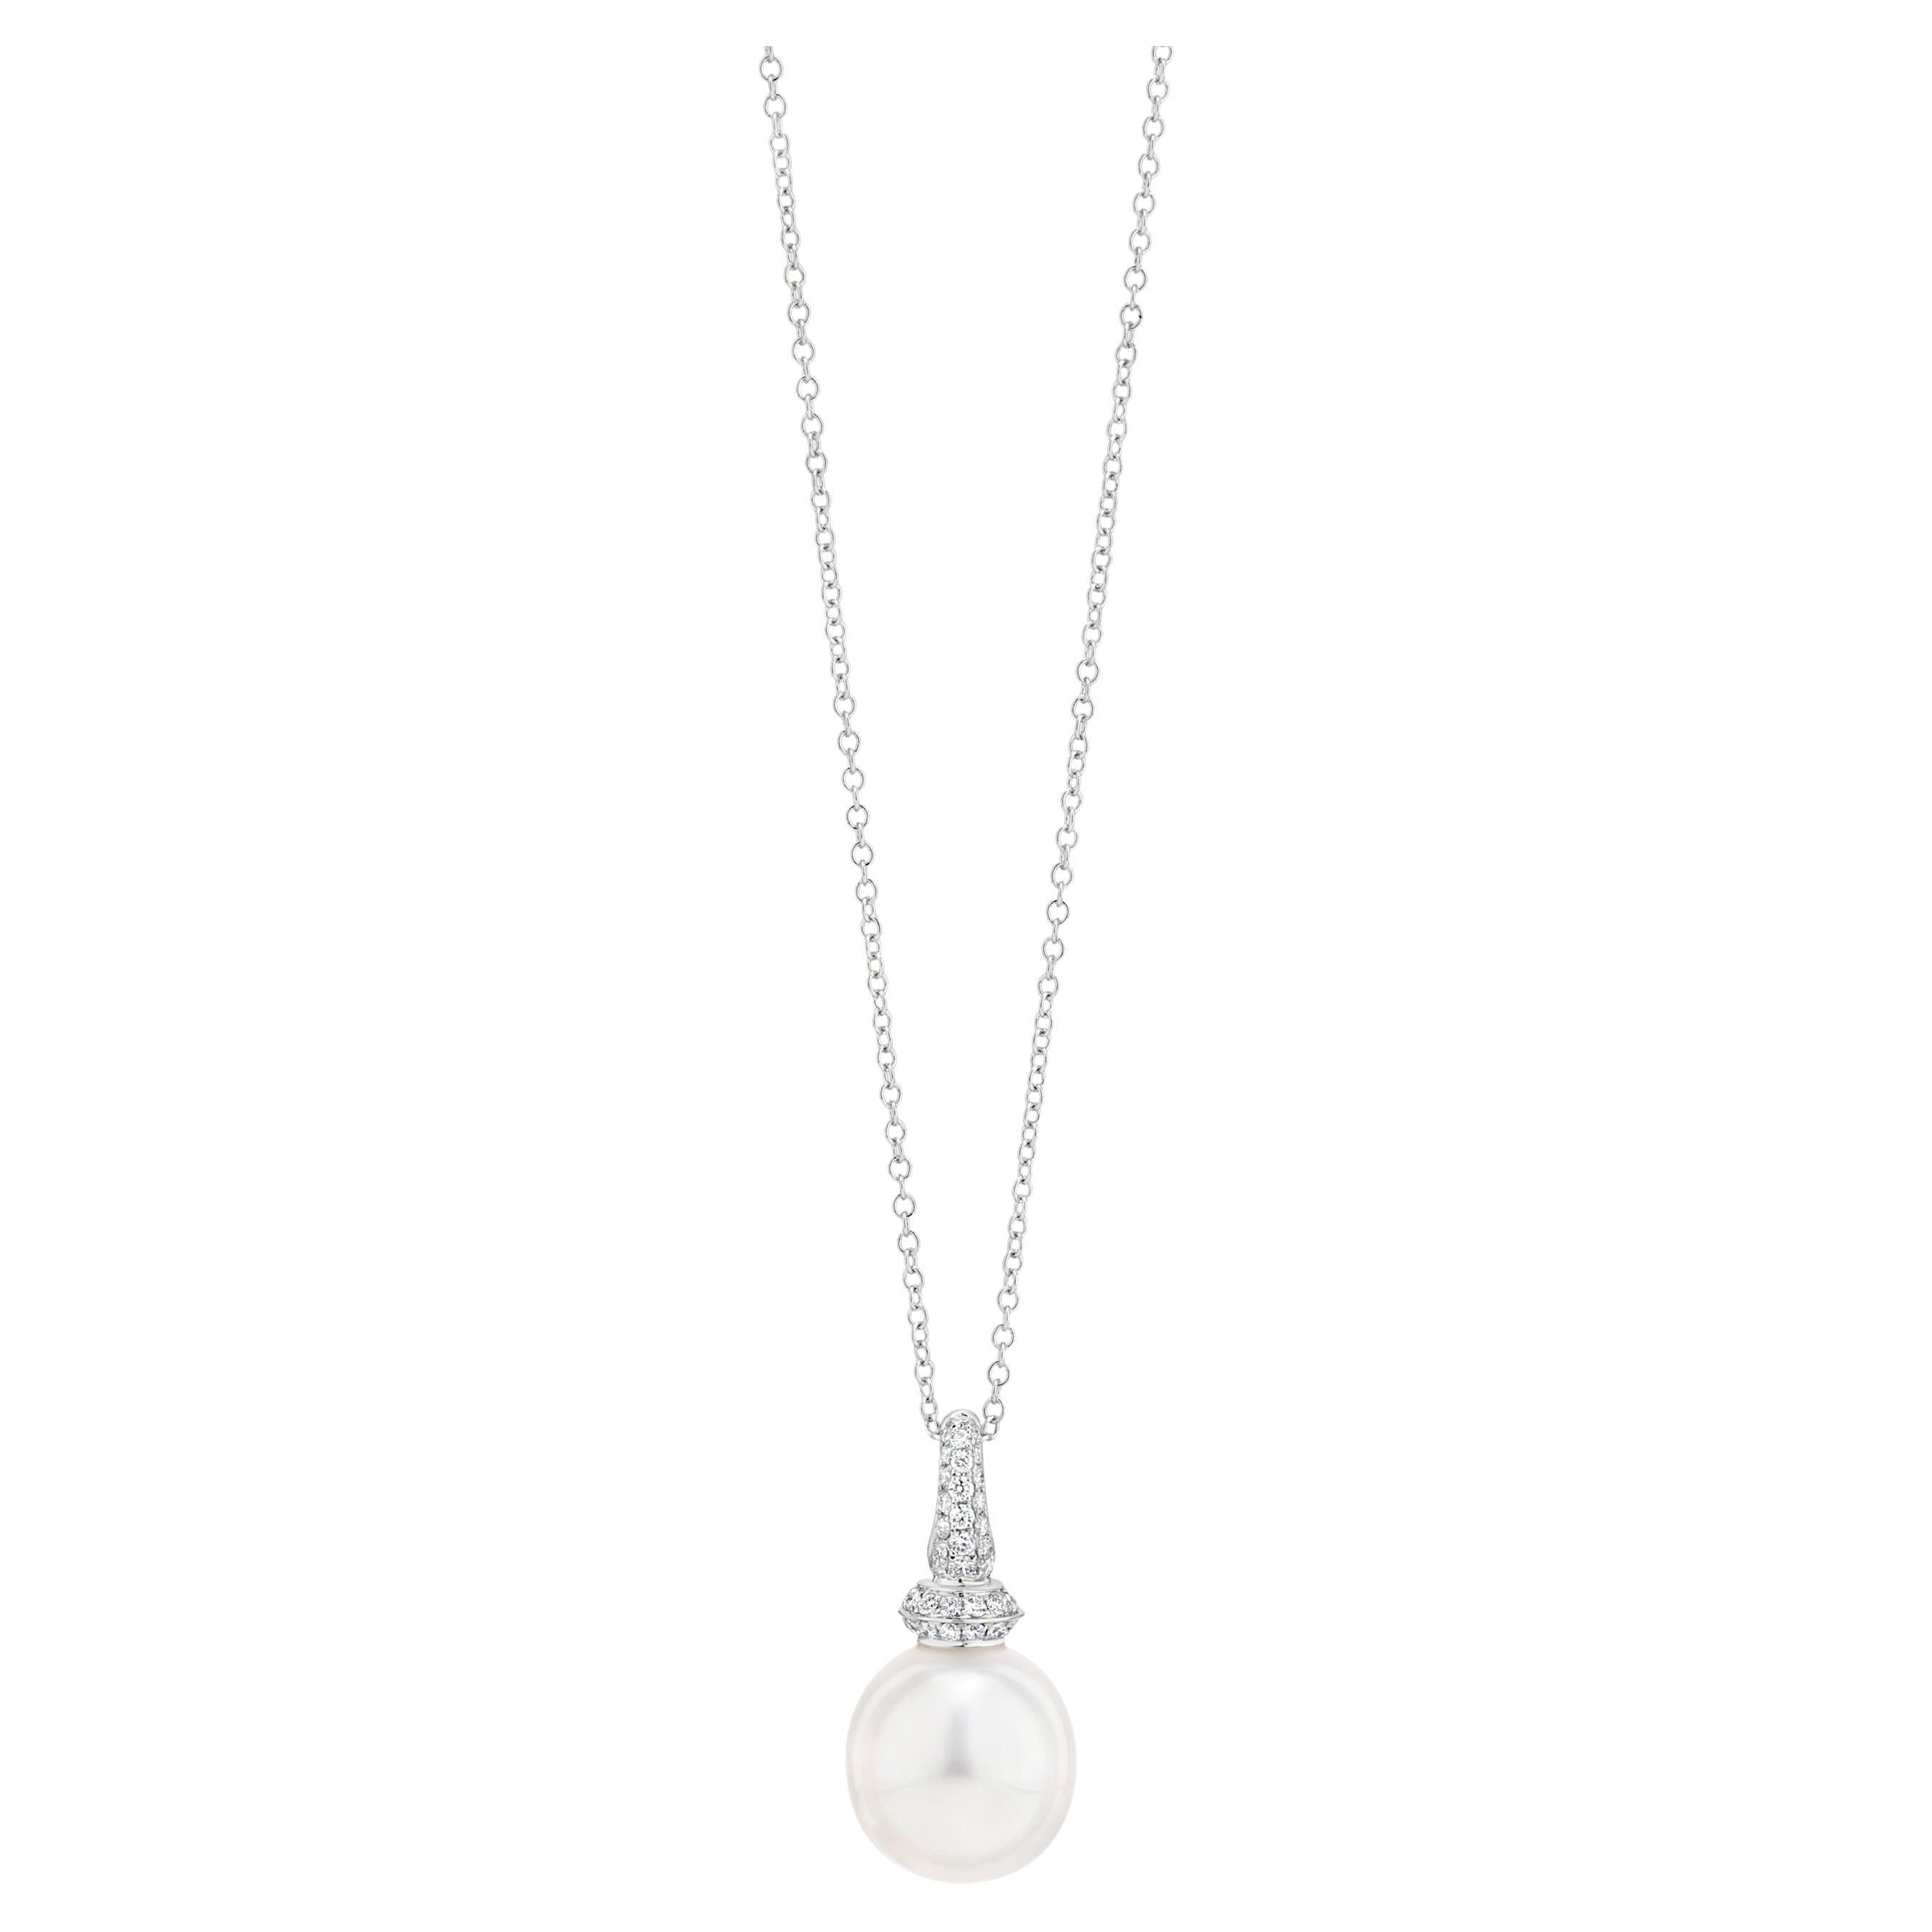 Luxle South Sea Pearl and Diamond Drop Pendant Necklace in 18k White Gold